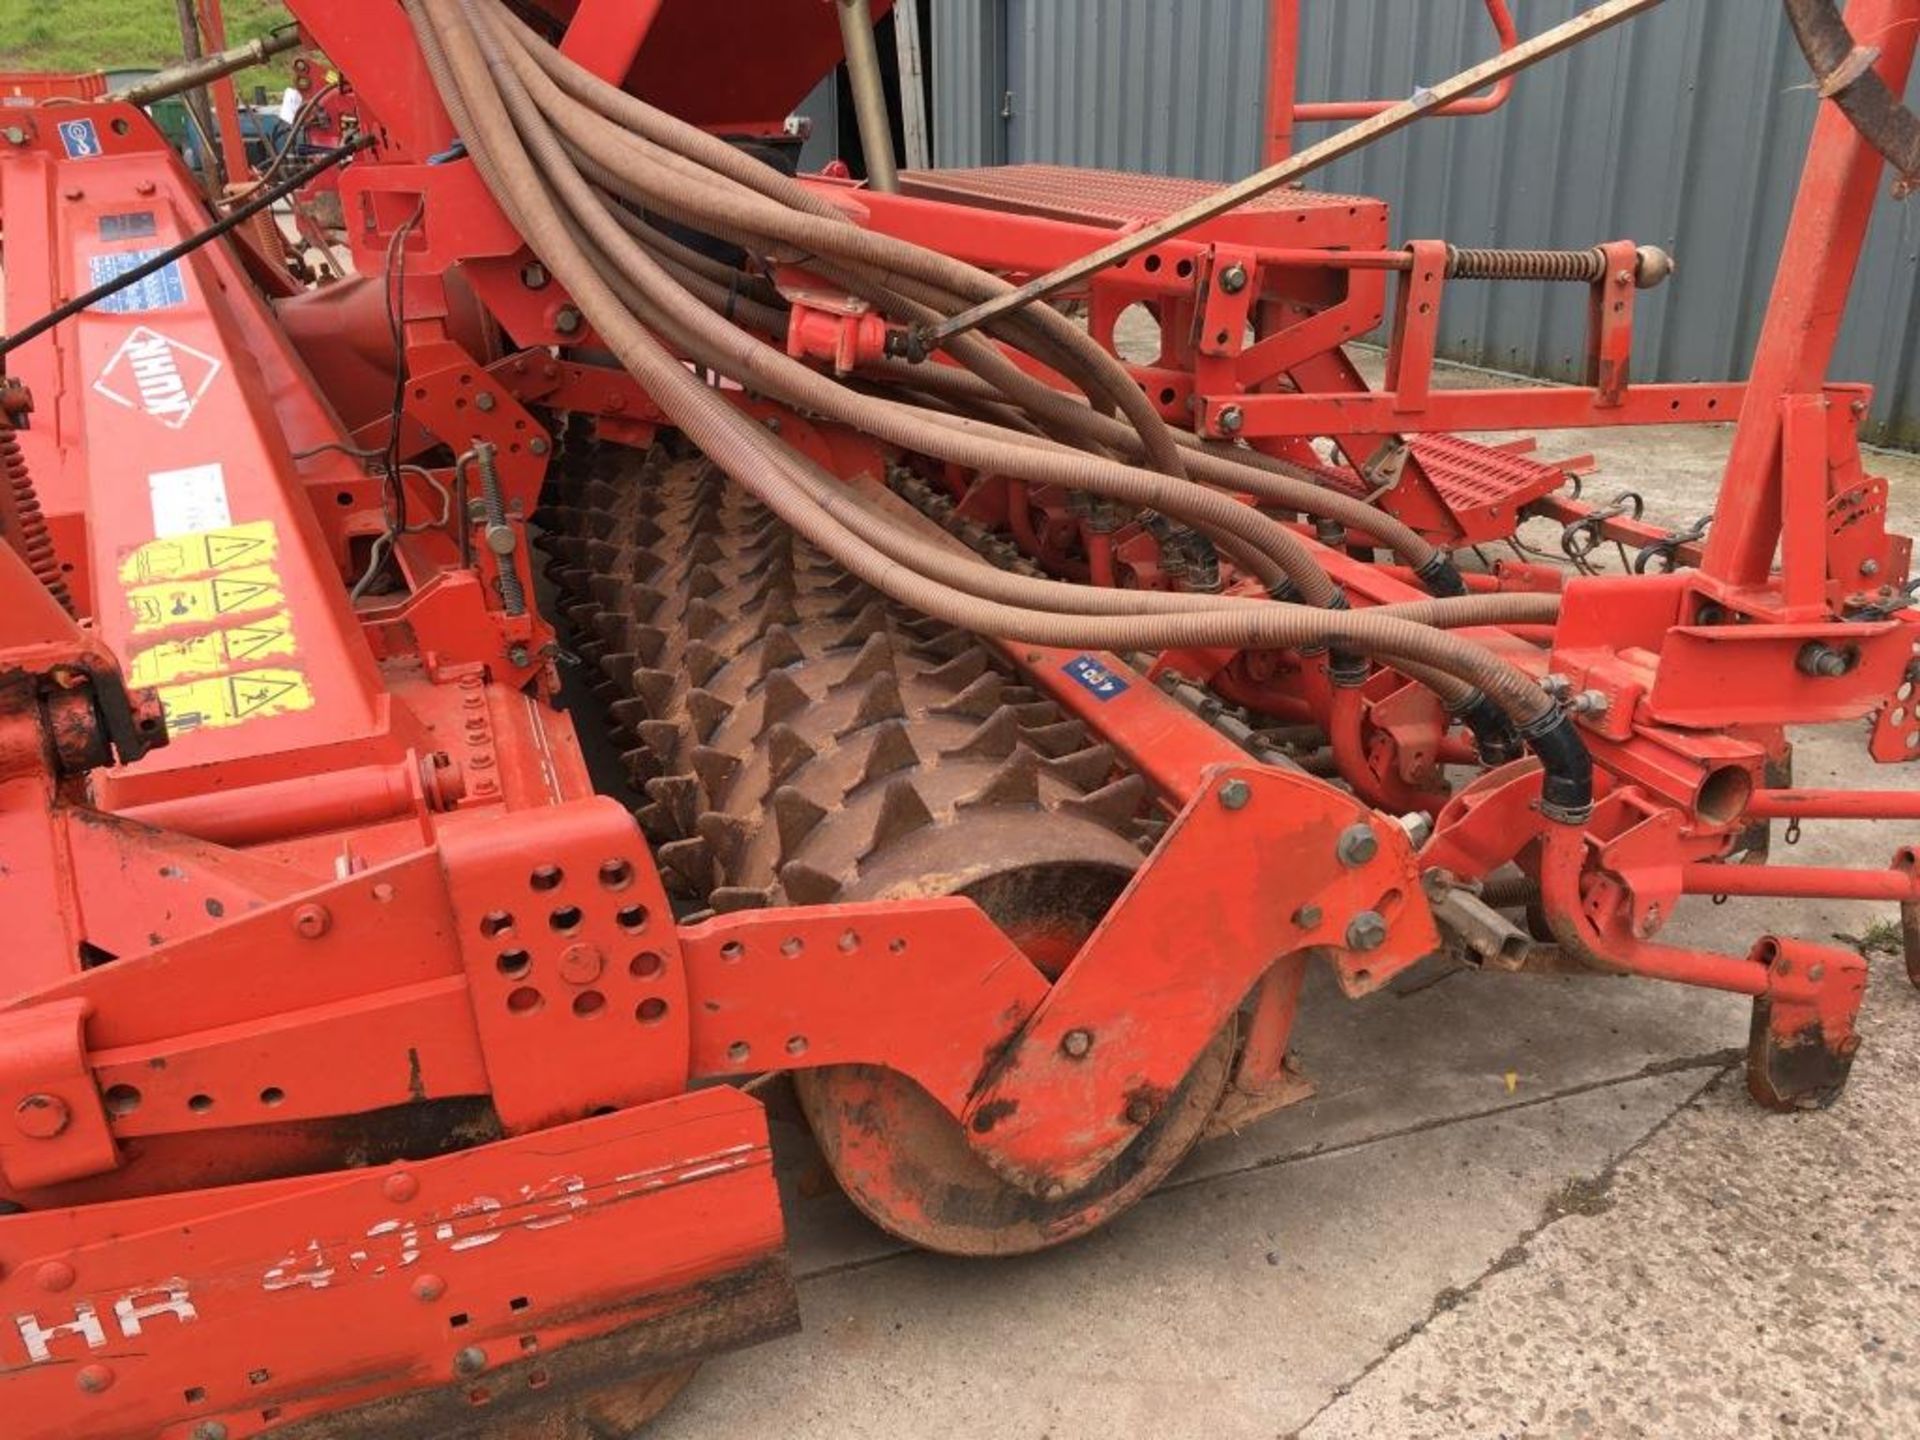 Kuhn HR 4003D 14' power harrow, serial number: A4631 (2002) with Kuhn Venta LC 402 seed drill, - Bild 7 aus 15